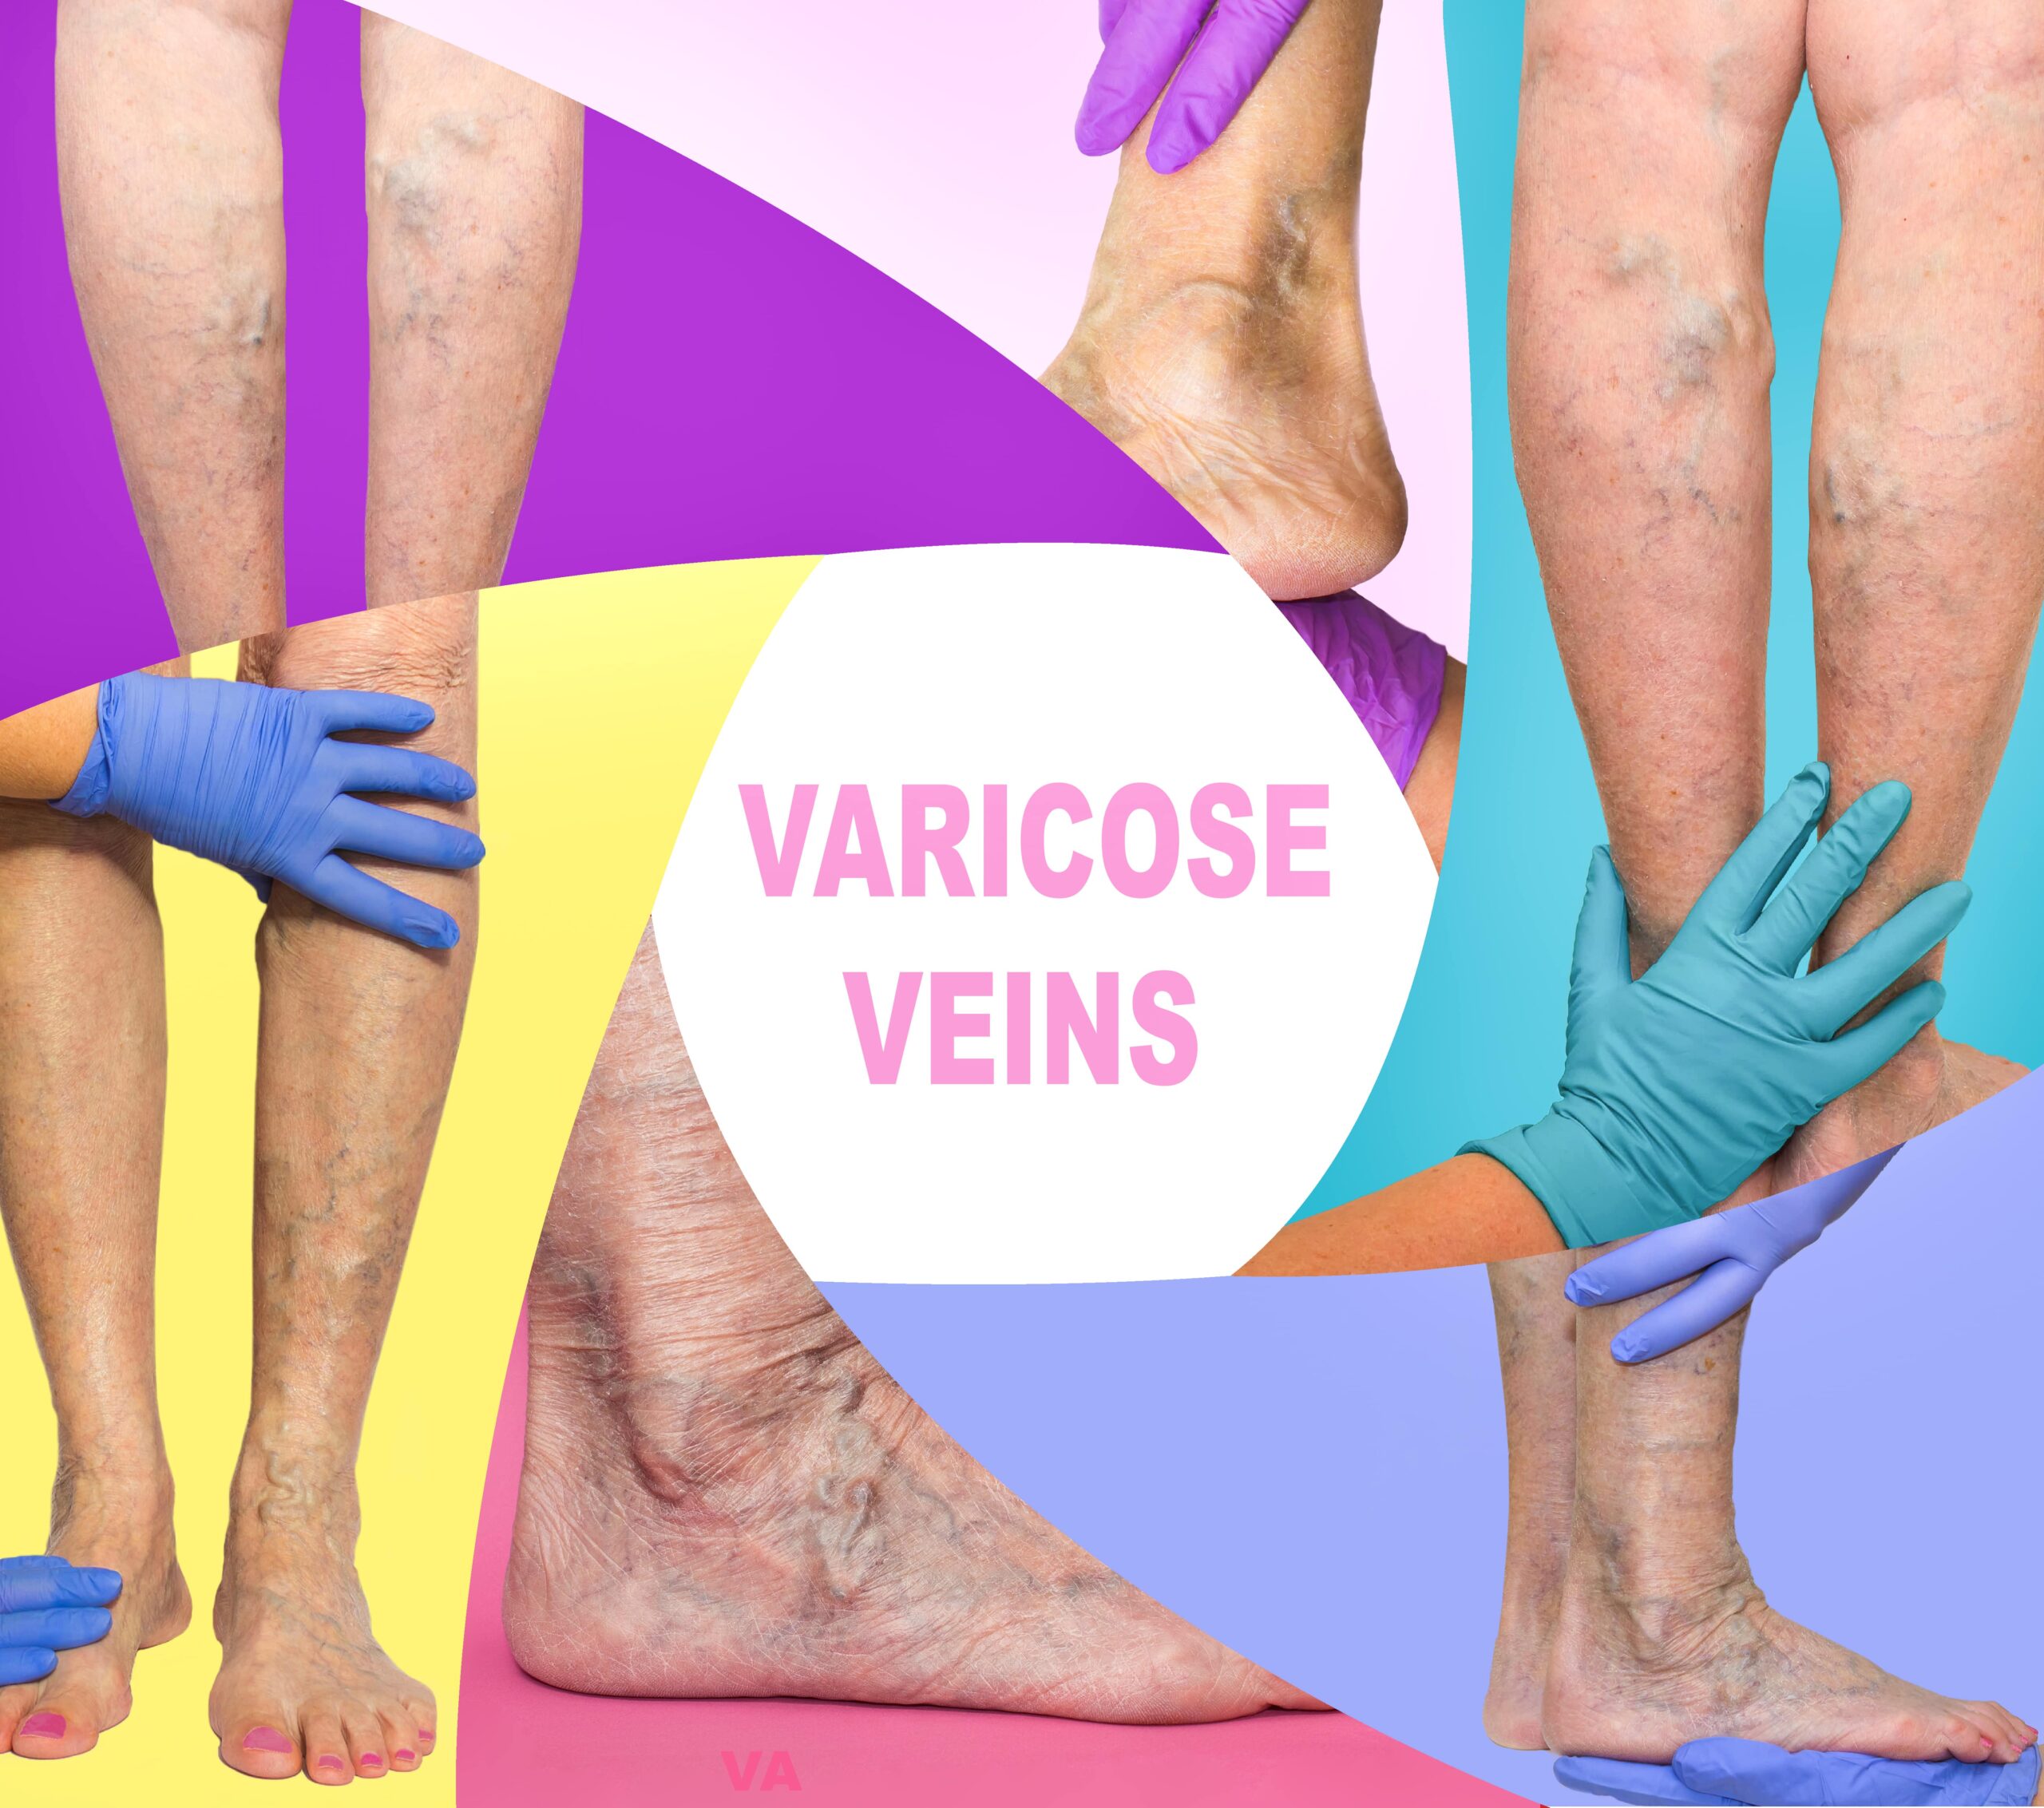 varicose veins and images showing their appearances